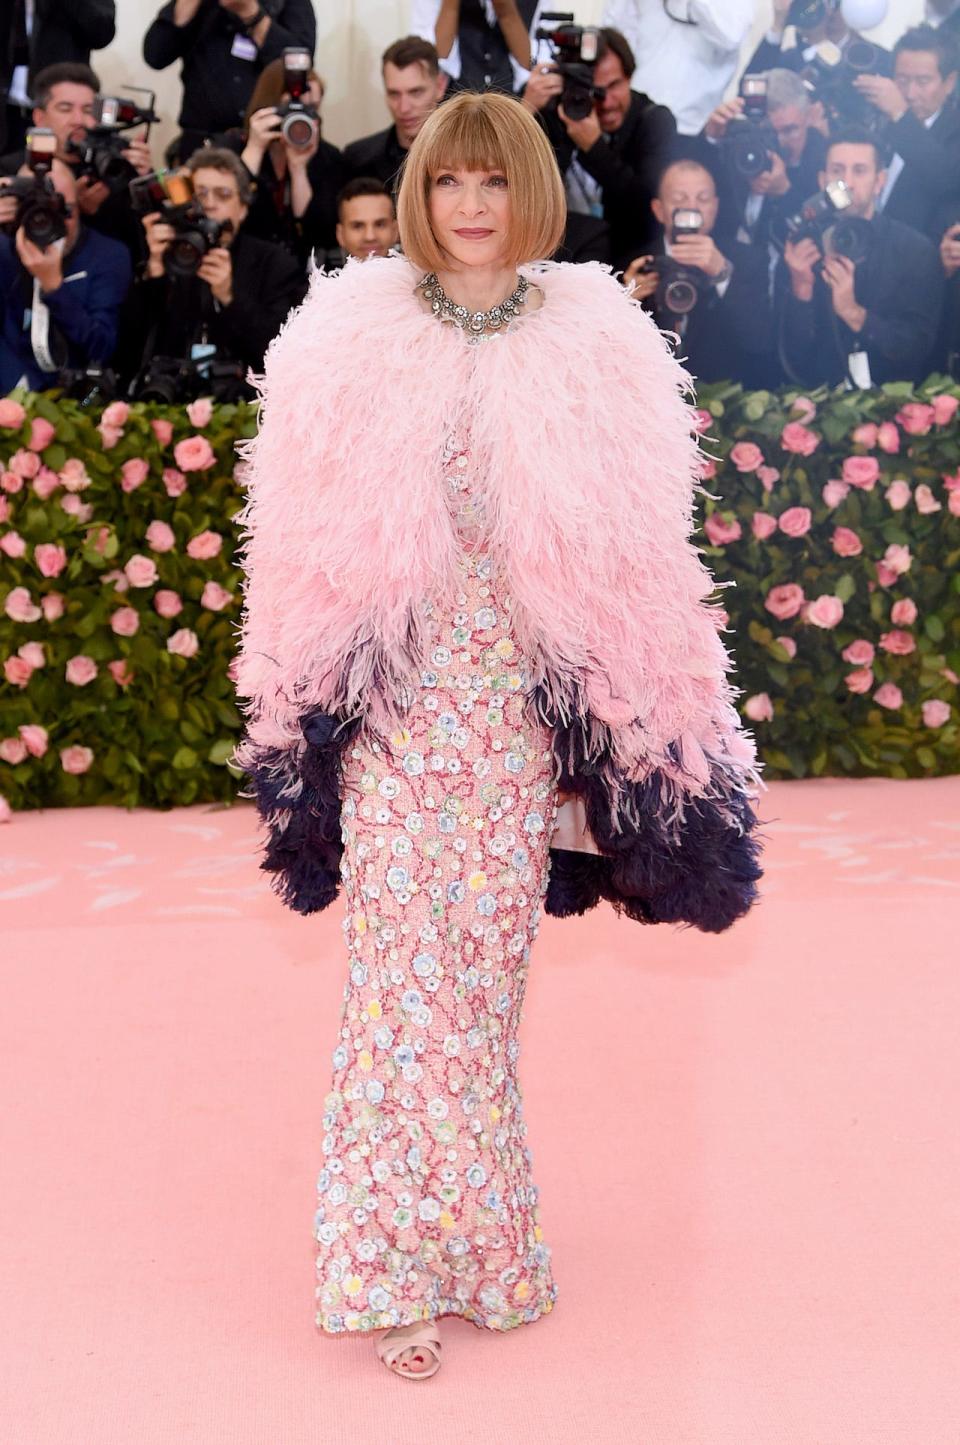 Anna Wintour at the 2019 Met Gala.